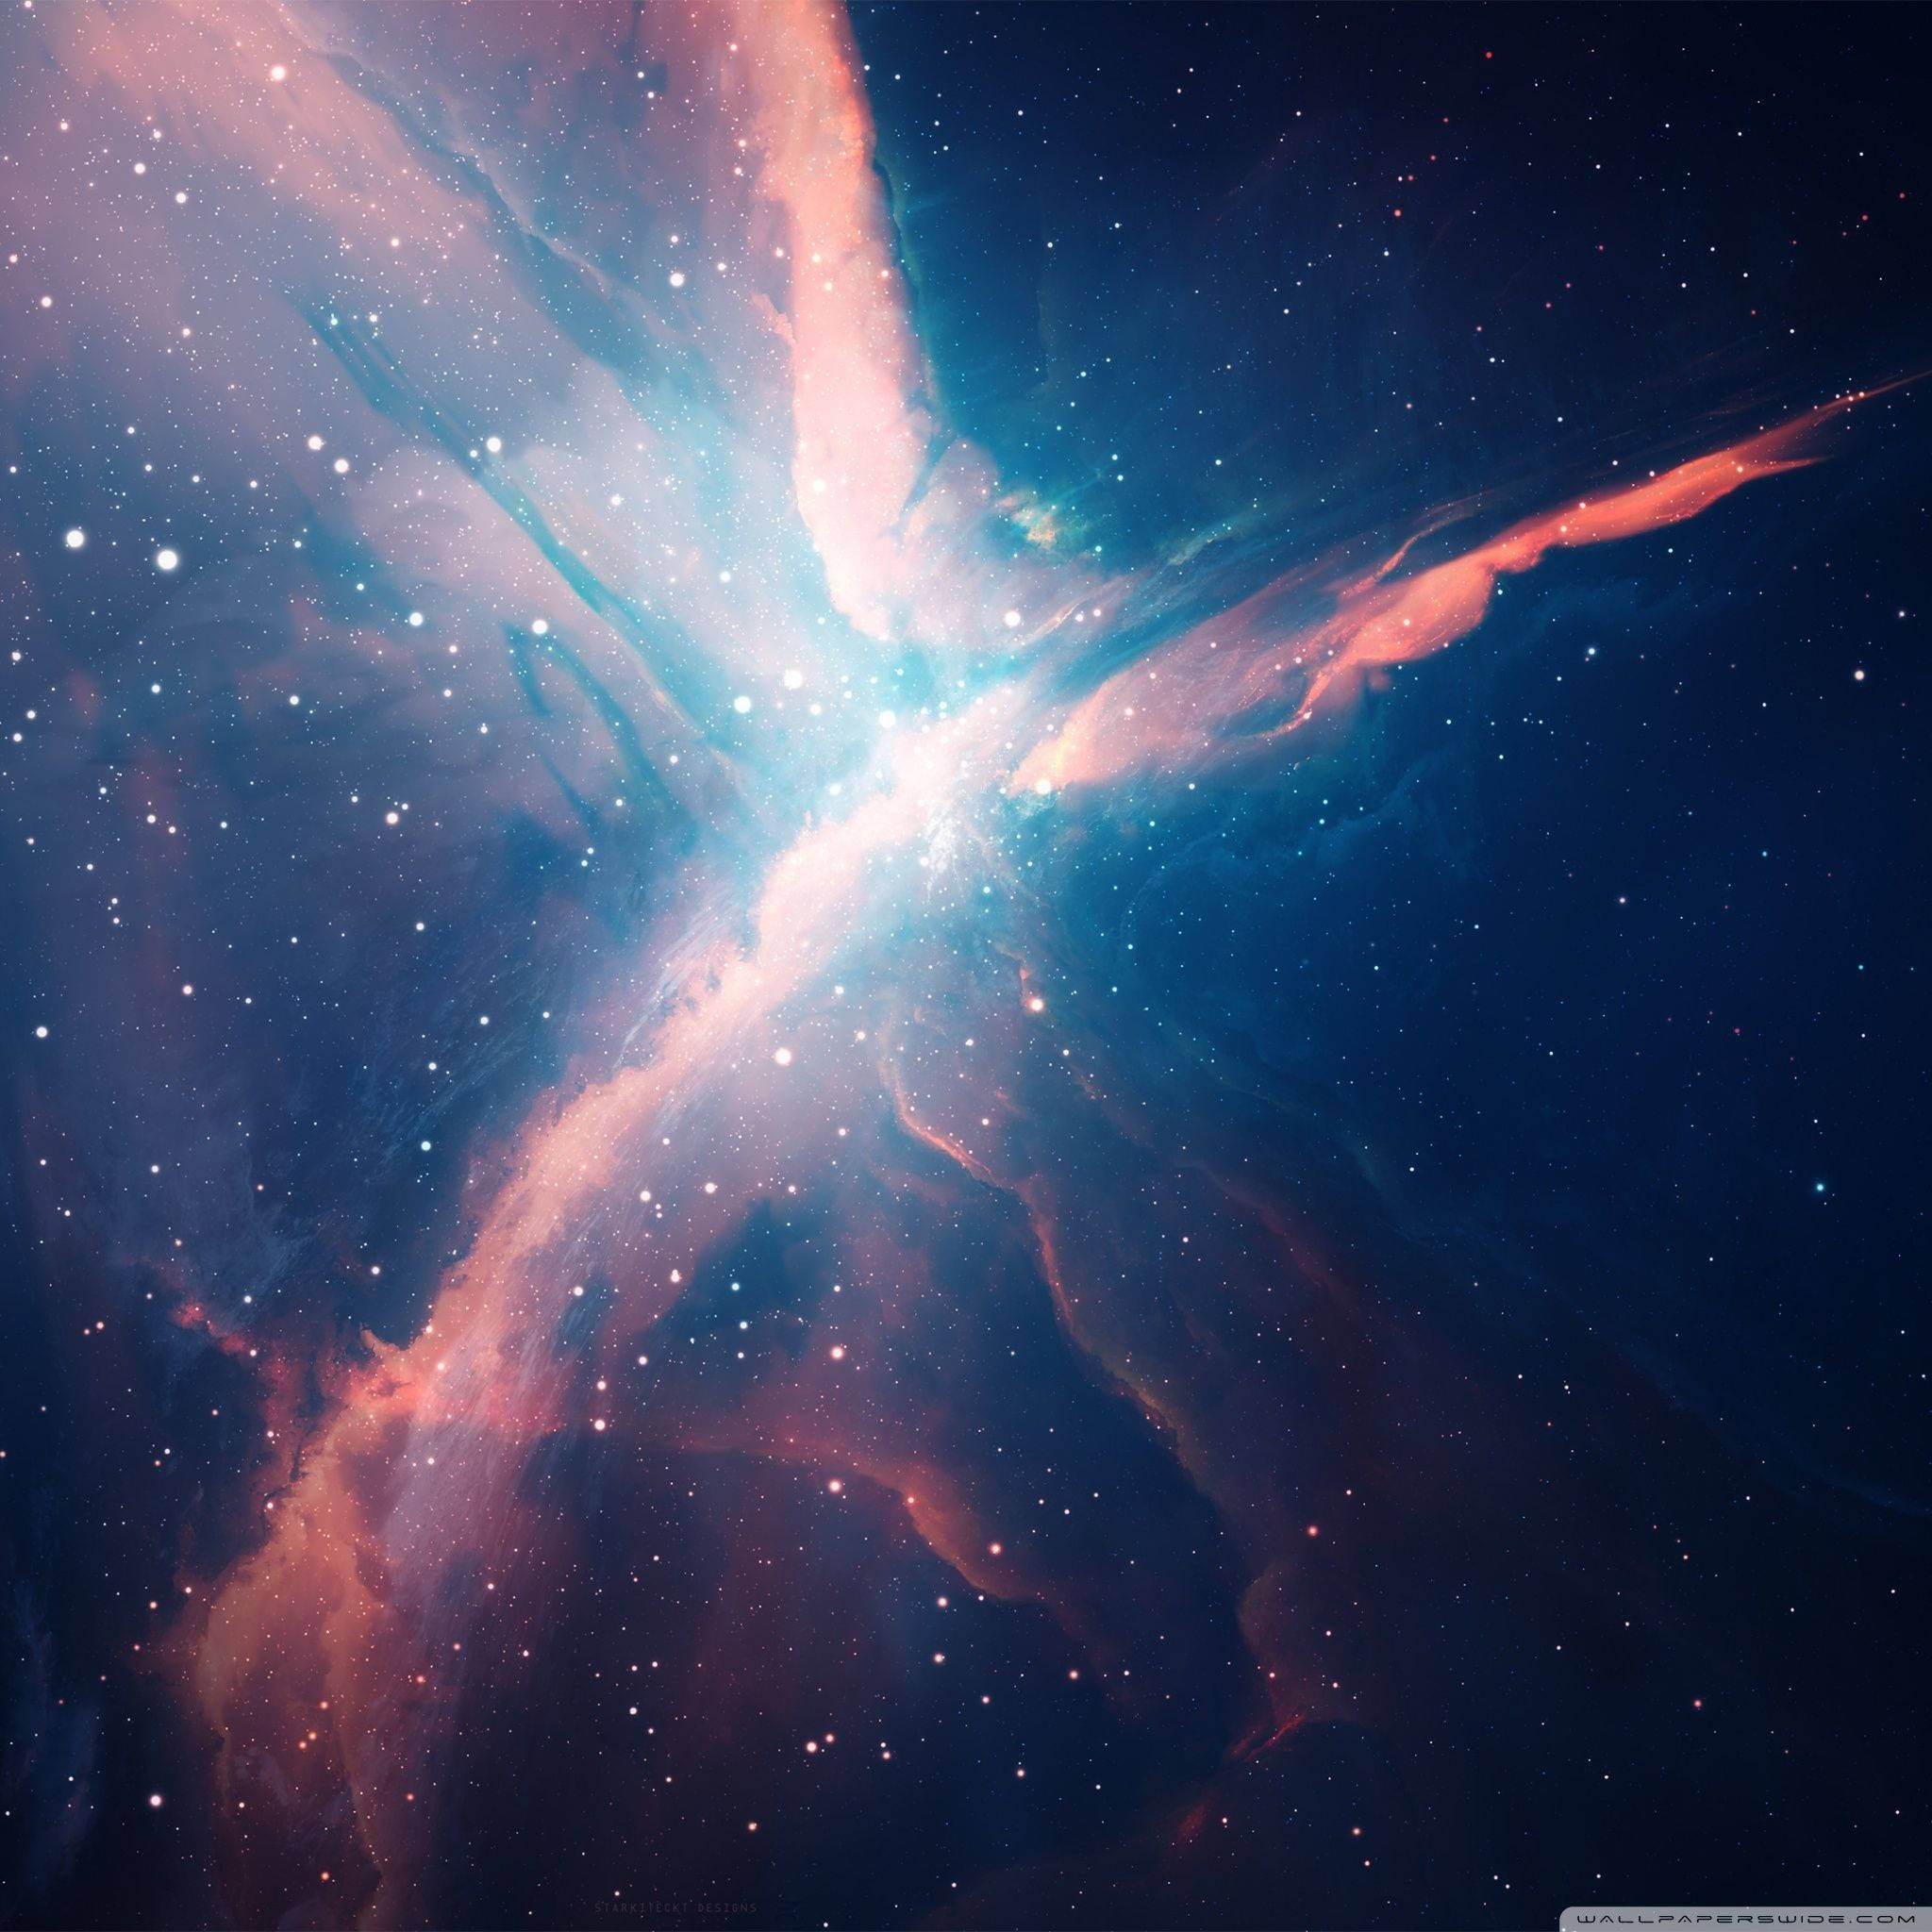 Glowing Galaxy As Official Ipad Theme Wallpaper